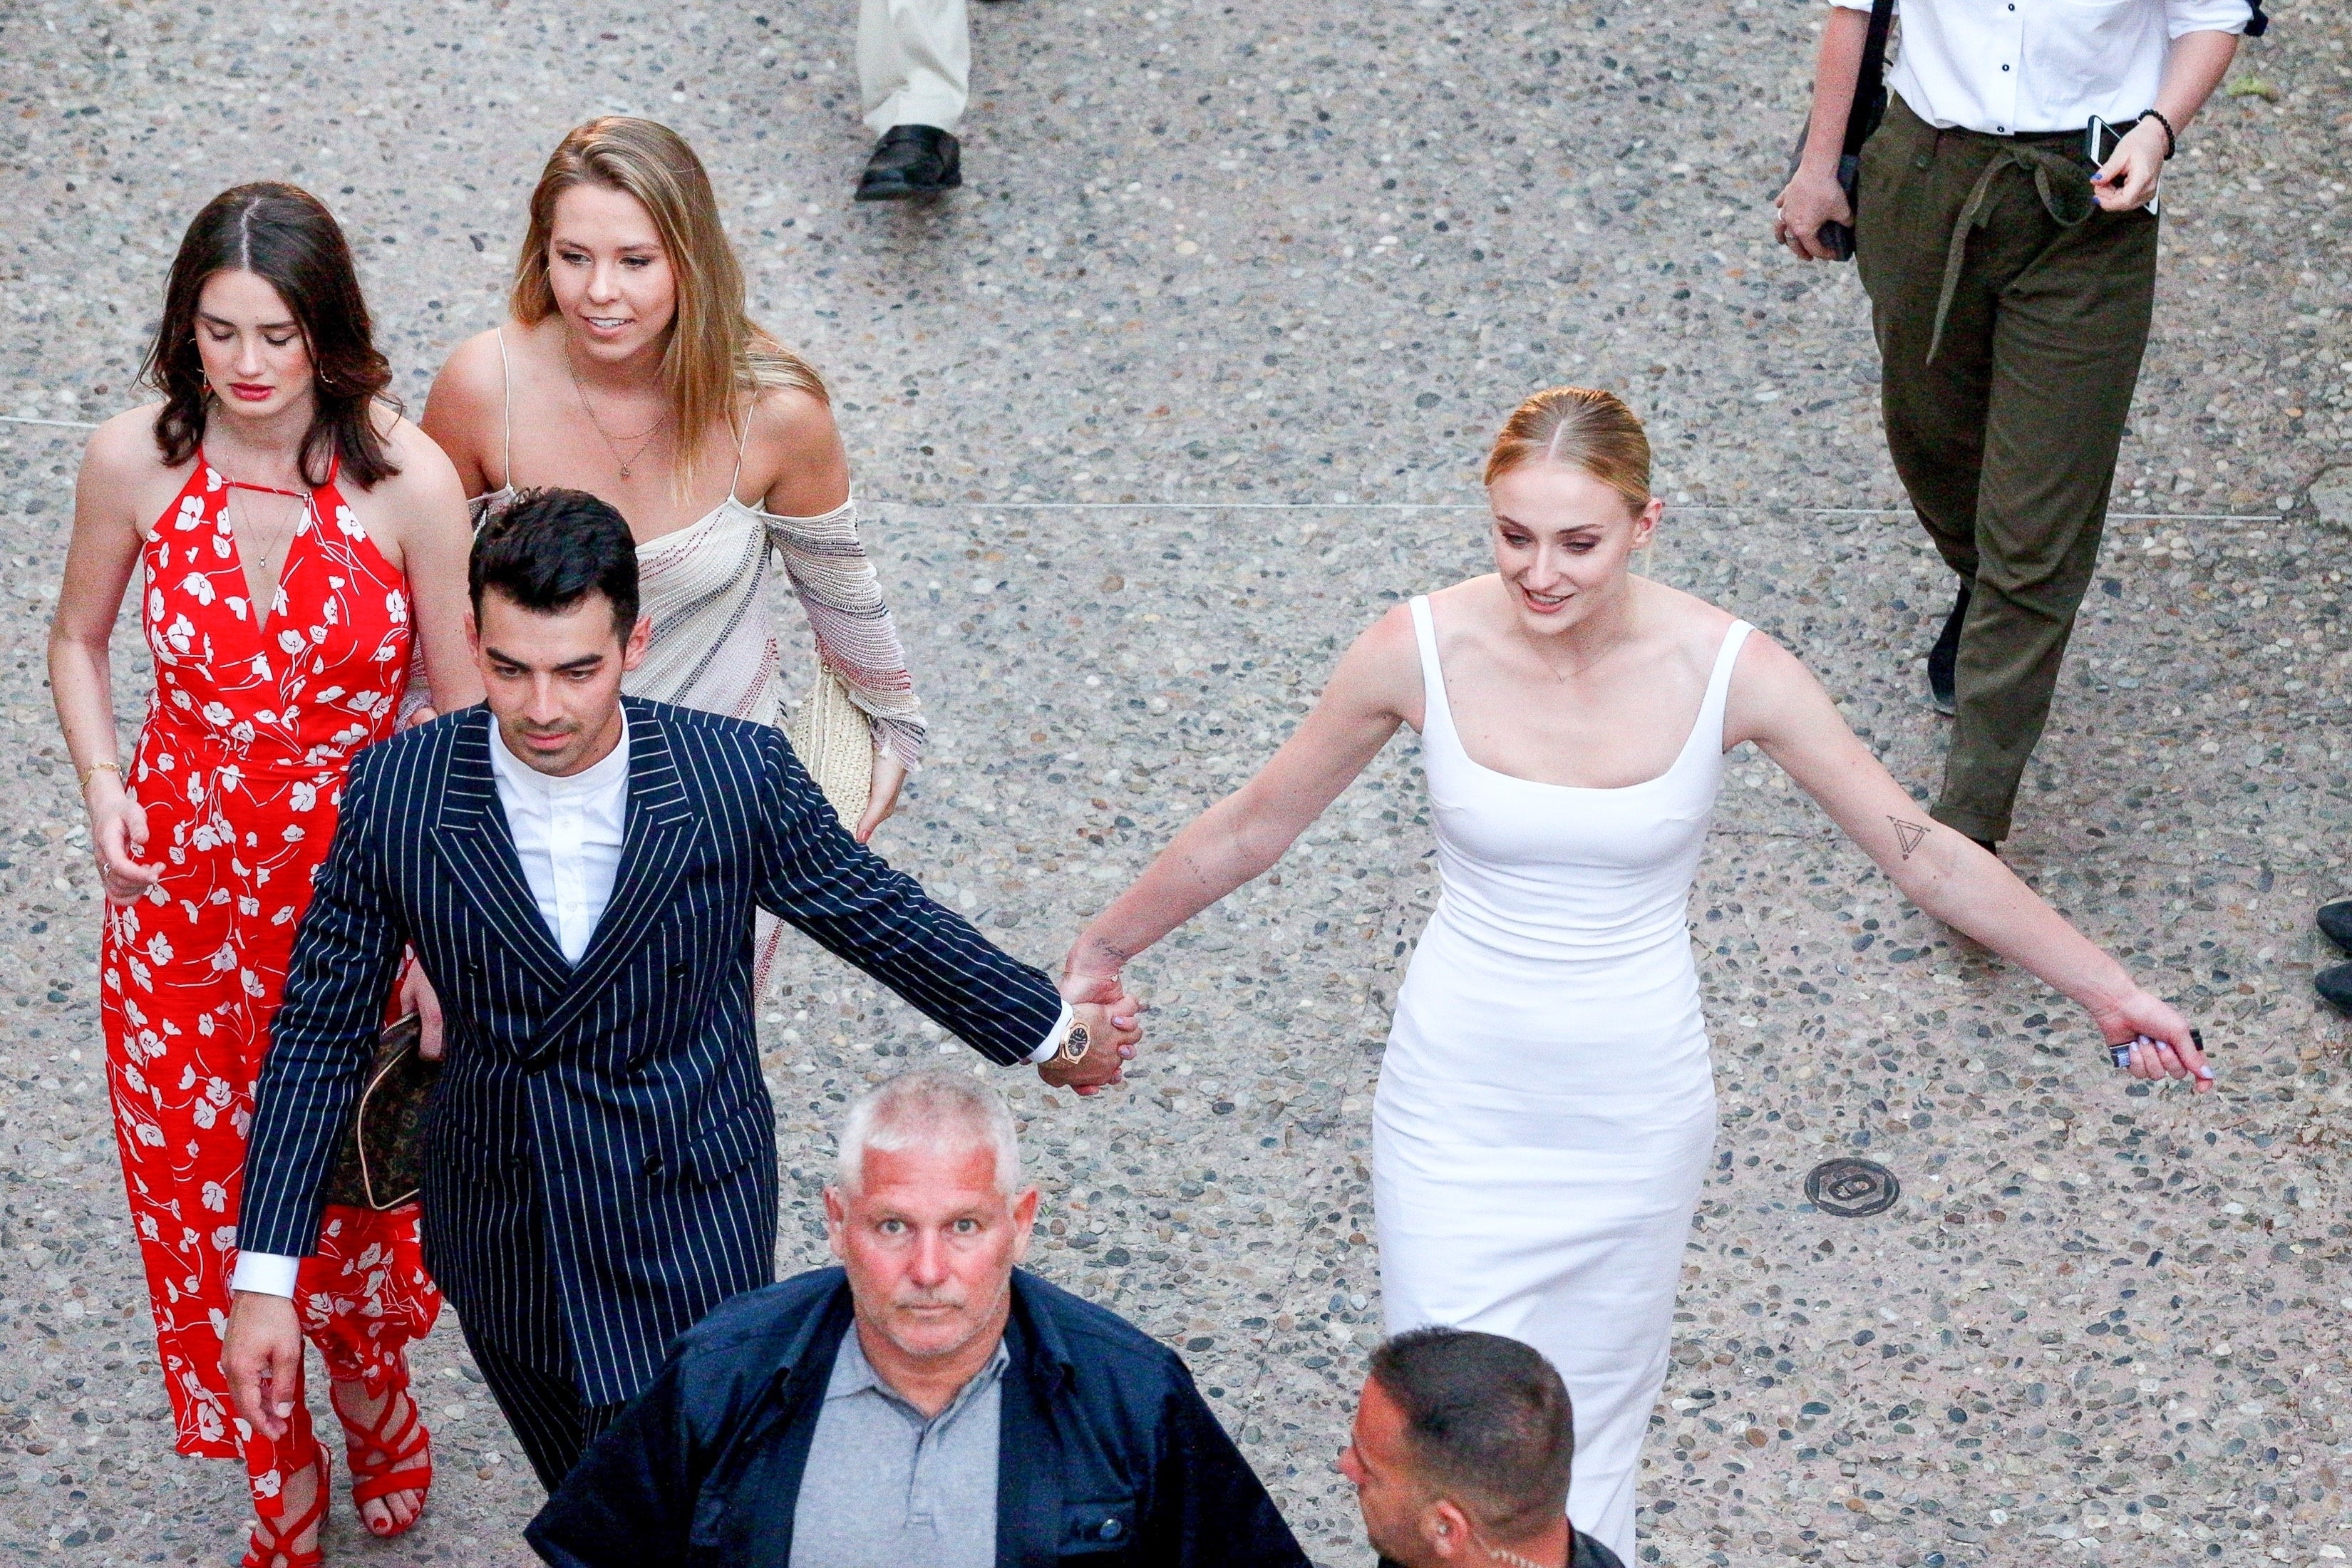 Sophie Turner Wears Stunning White Dress to Wedding Pre-Party With